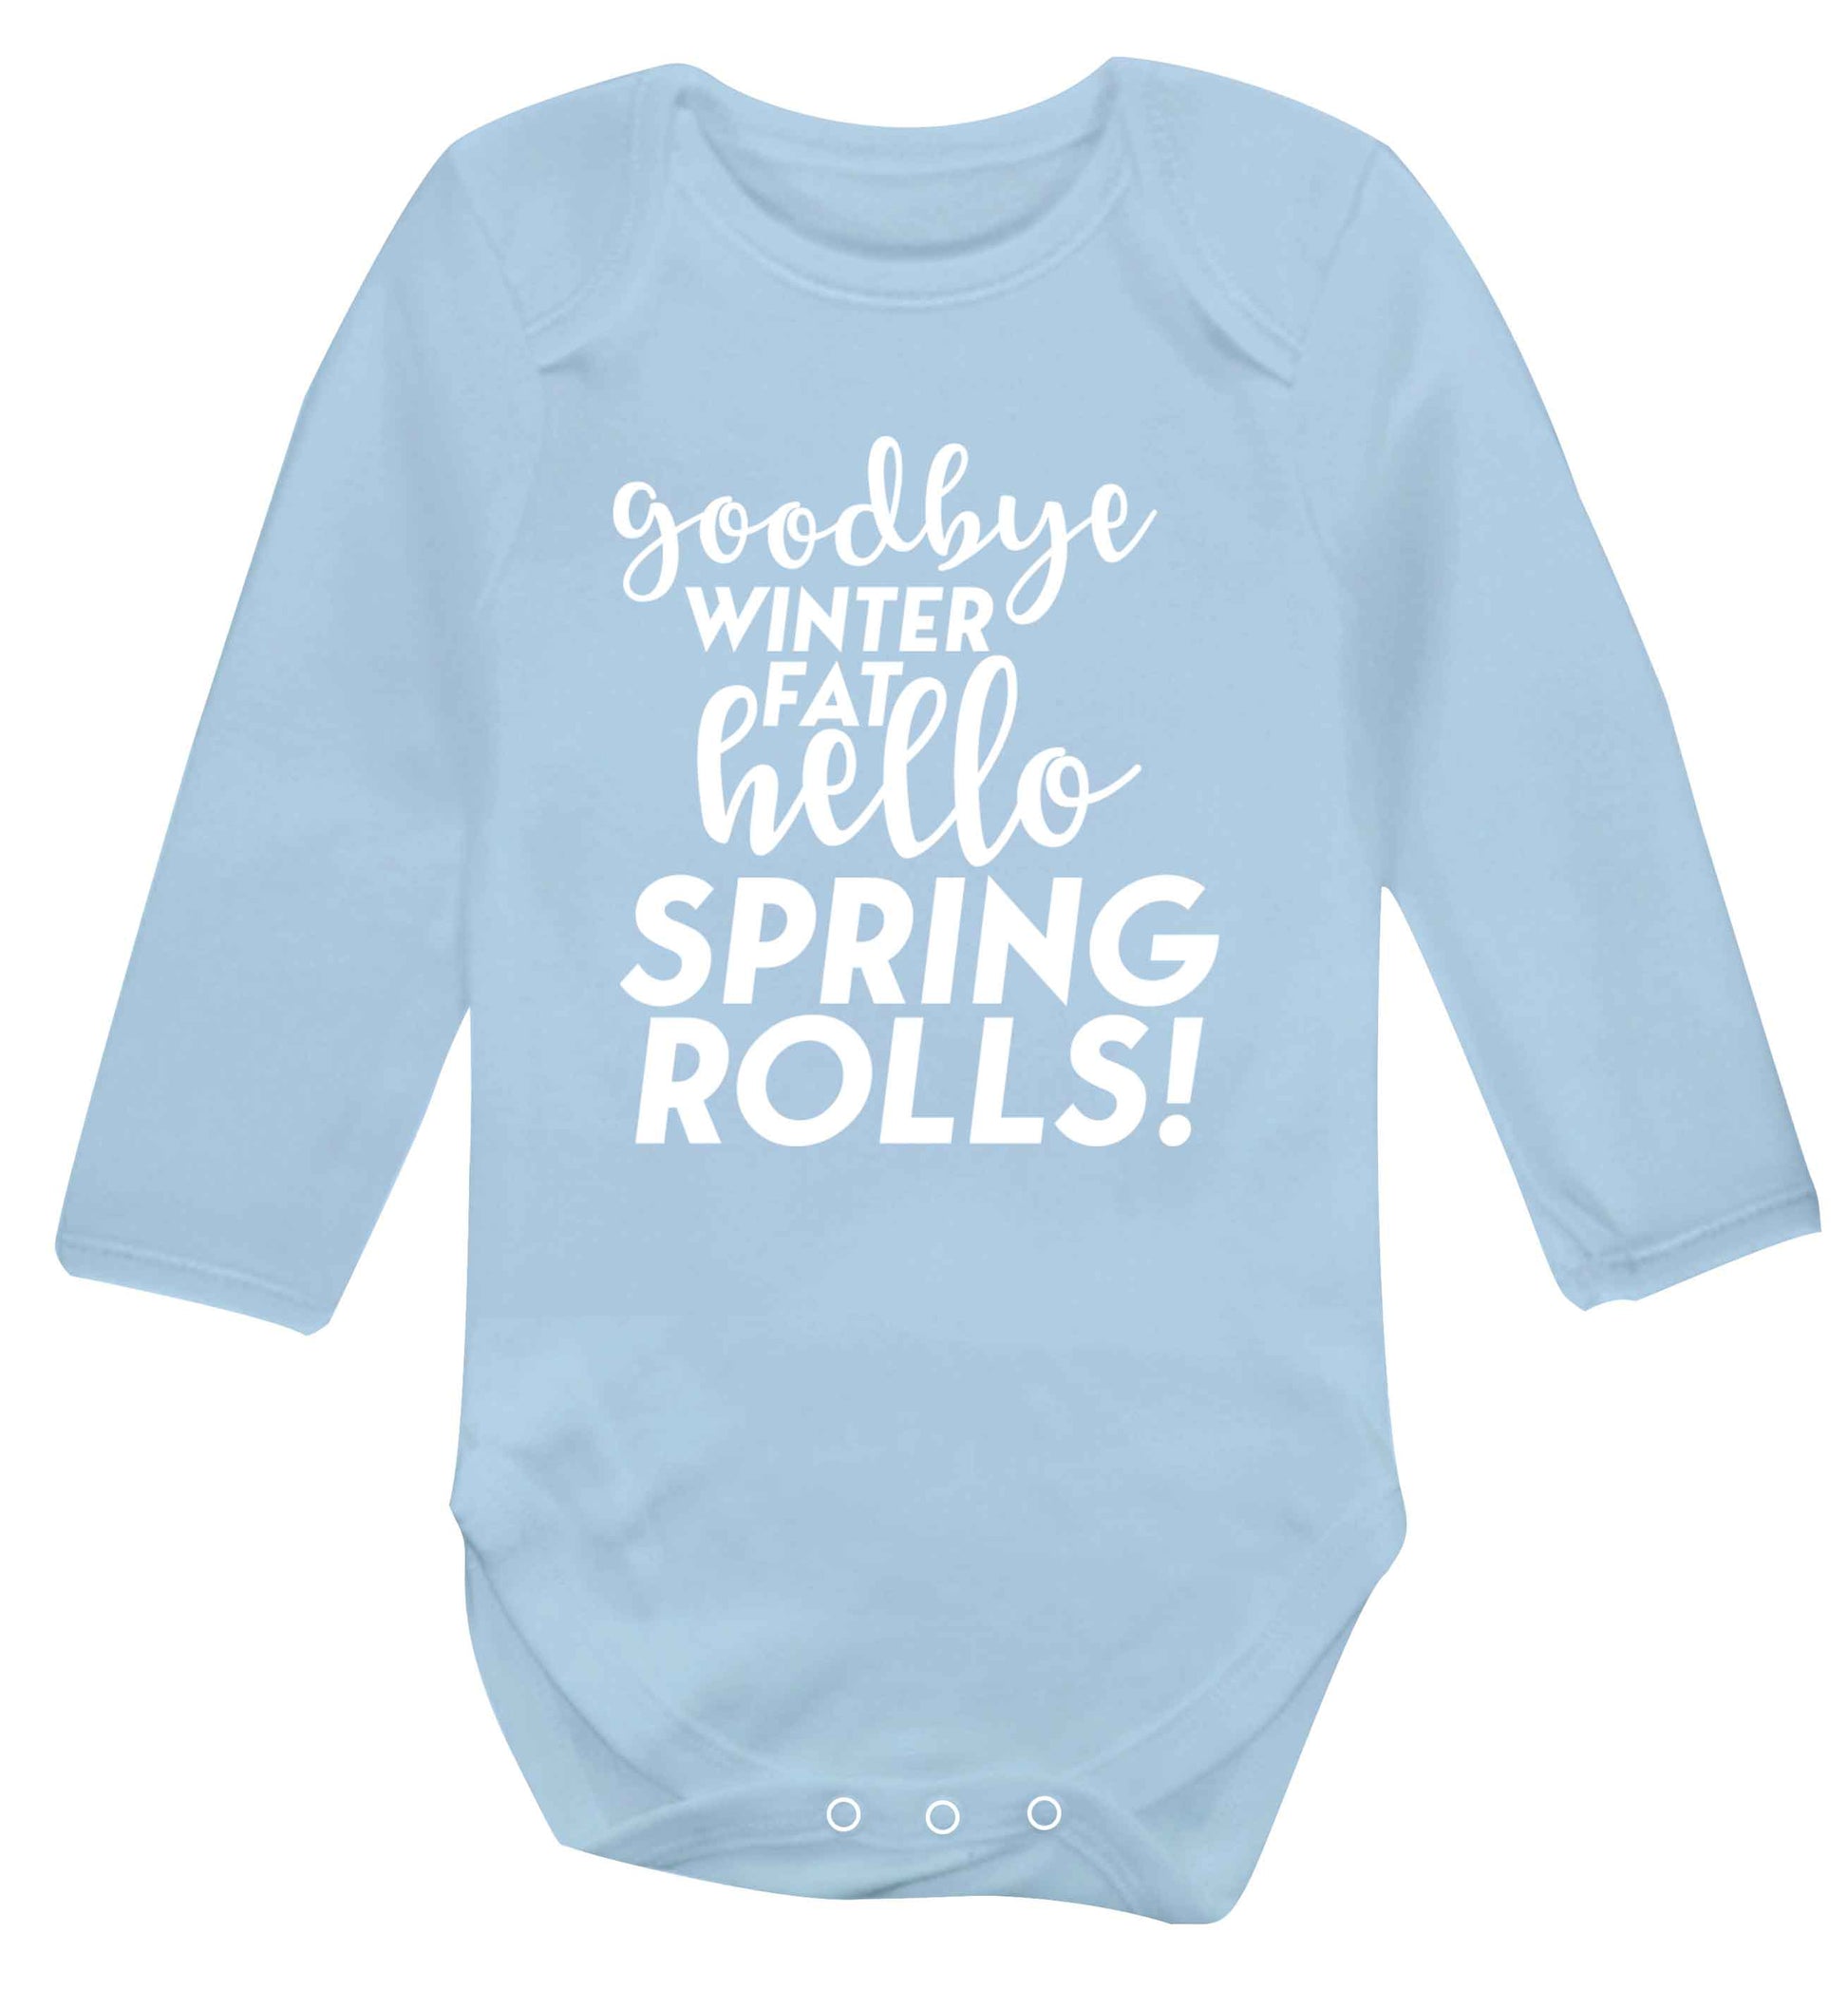 Goodbye winter fat hello spring rolls Baby Vest long sleeved pale blue 6-12 months